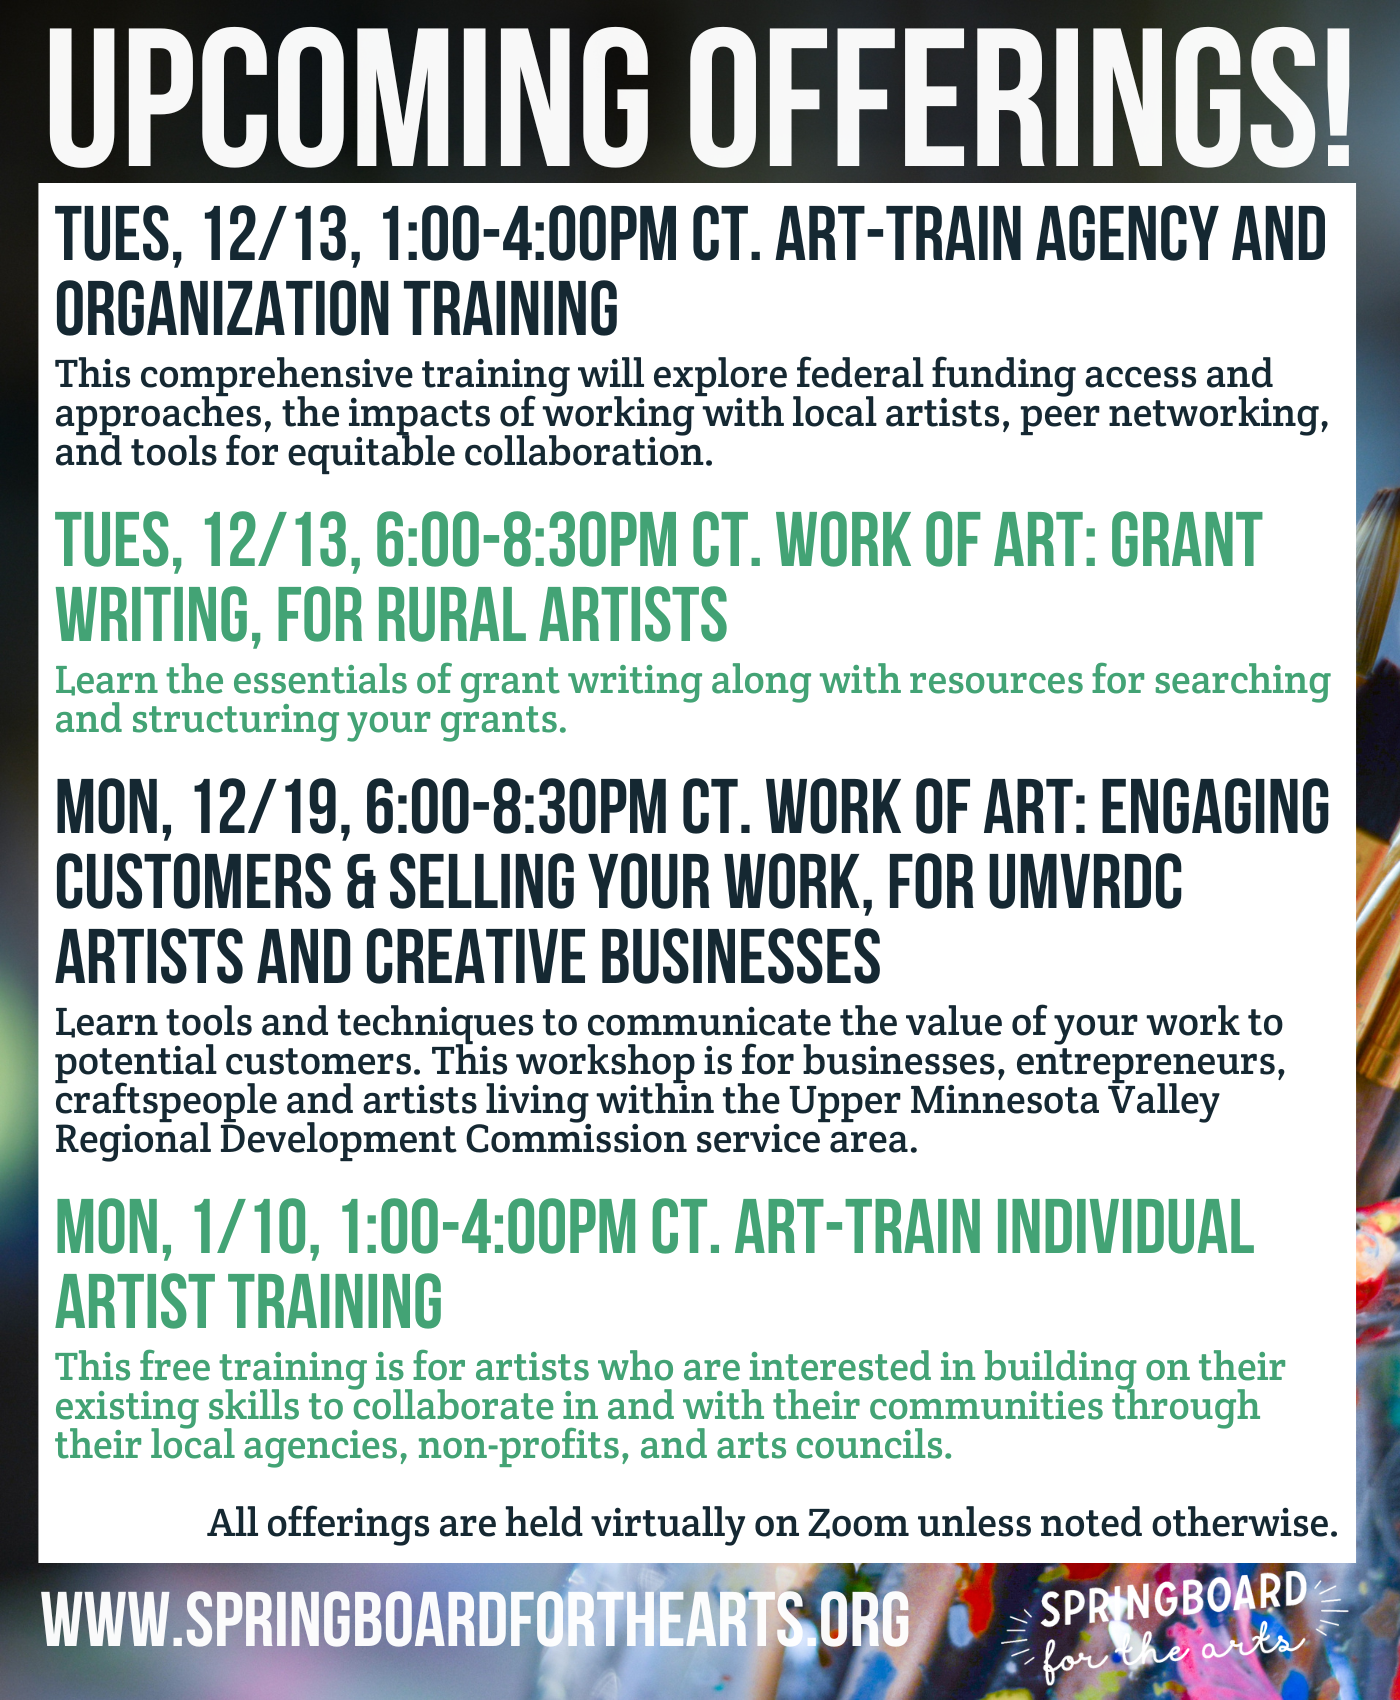 Offerings in December at Springboard for the Arts